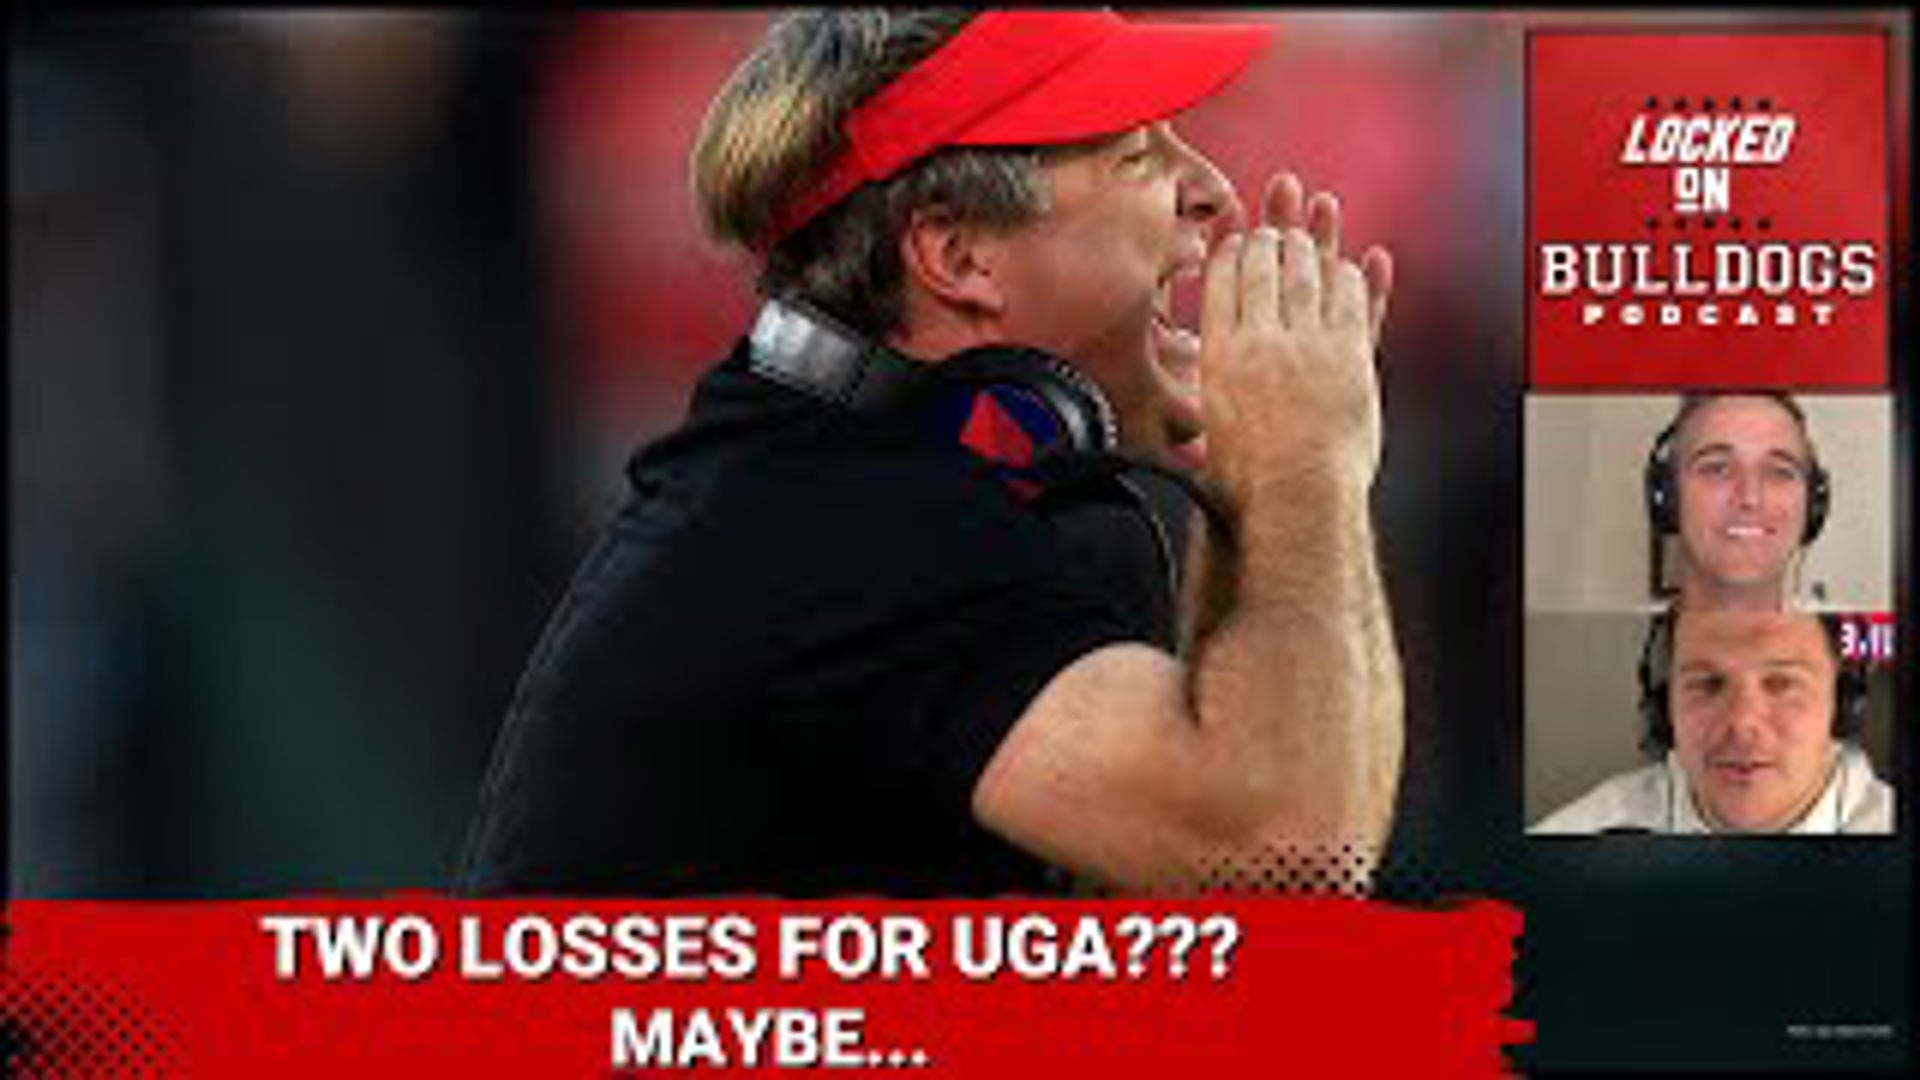 Is there a chance Georgia Football loses MORE than one game this year? We think so...